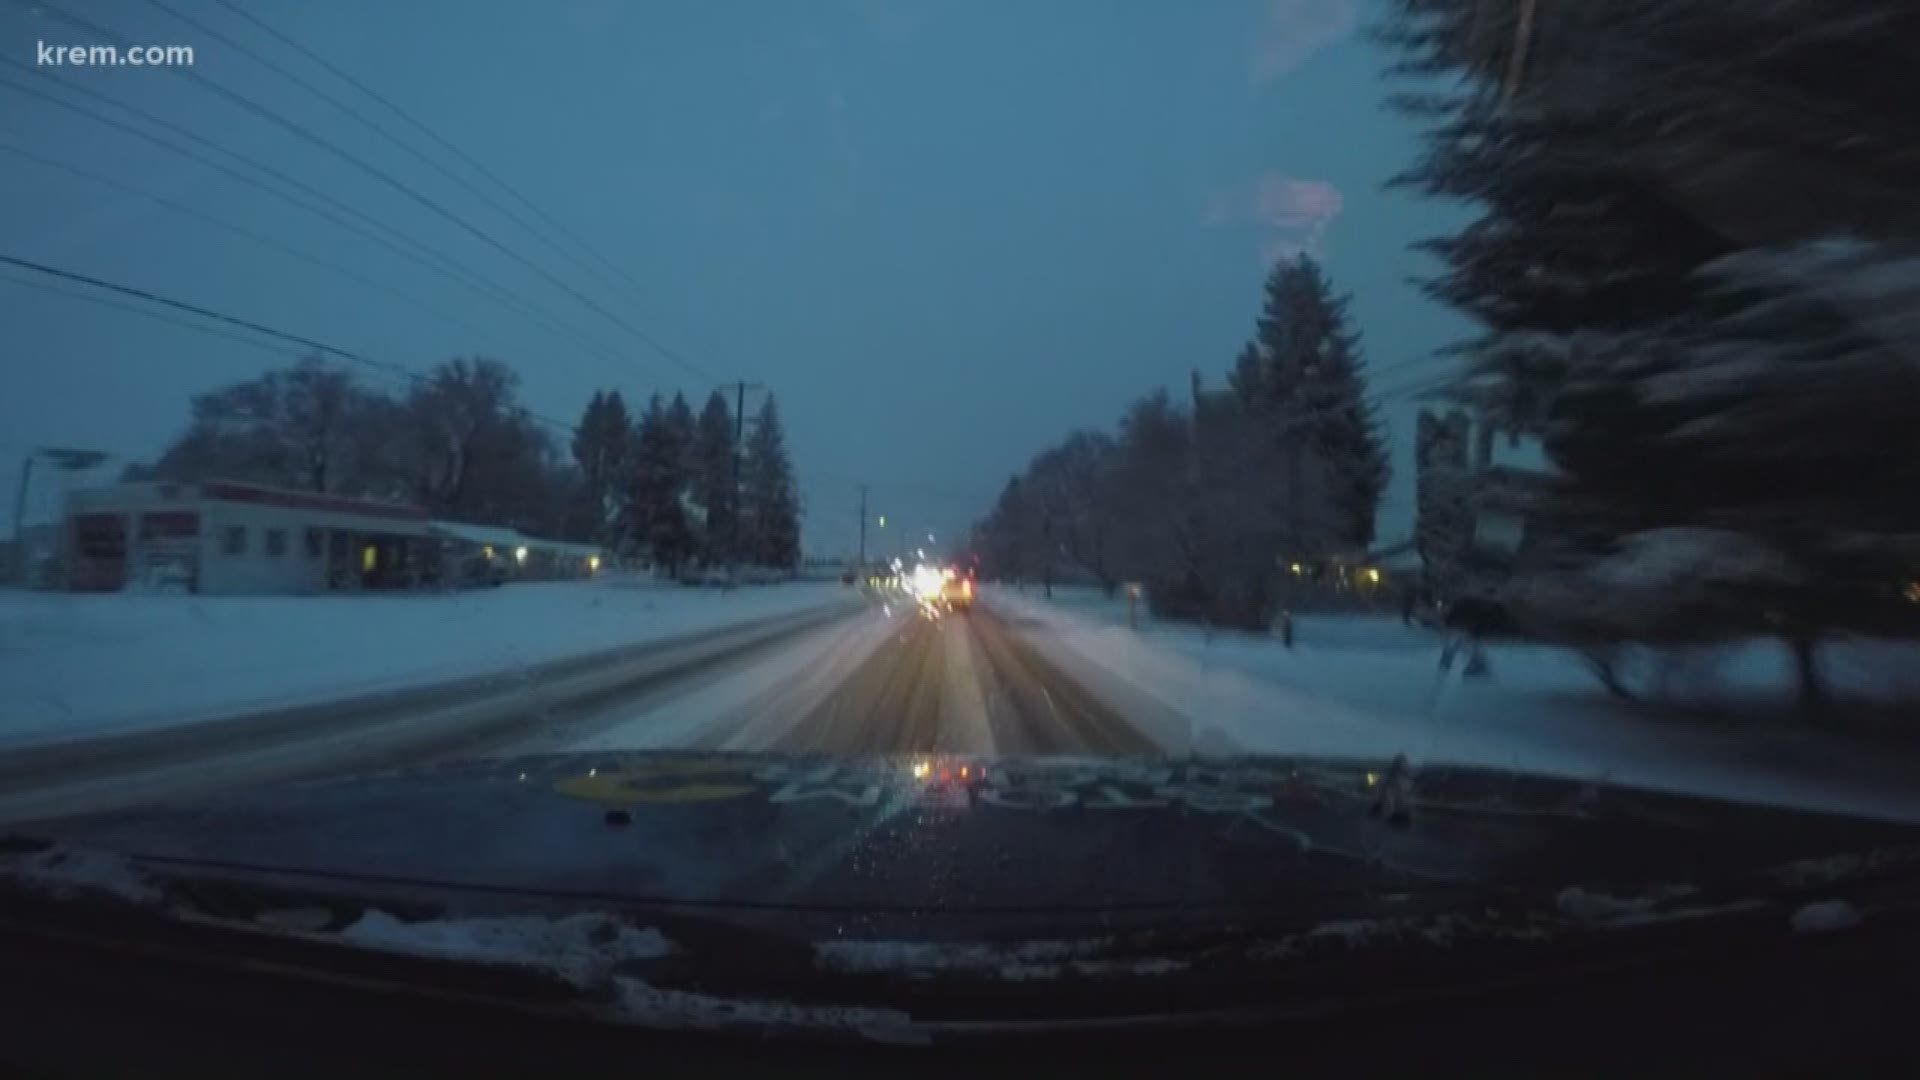 The National Weather Service says this is the most snow Spokane has seen since a rare October snowstorm hit the area more than two months ago.